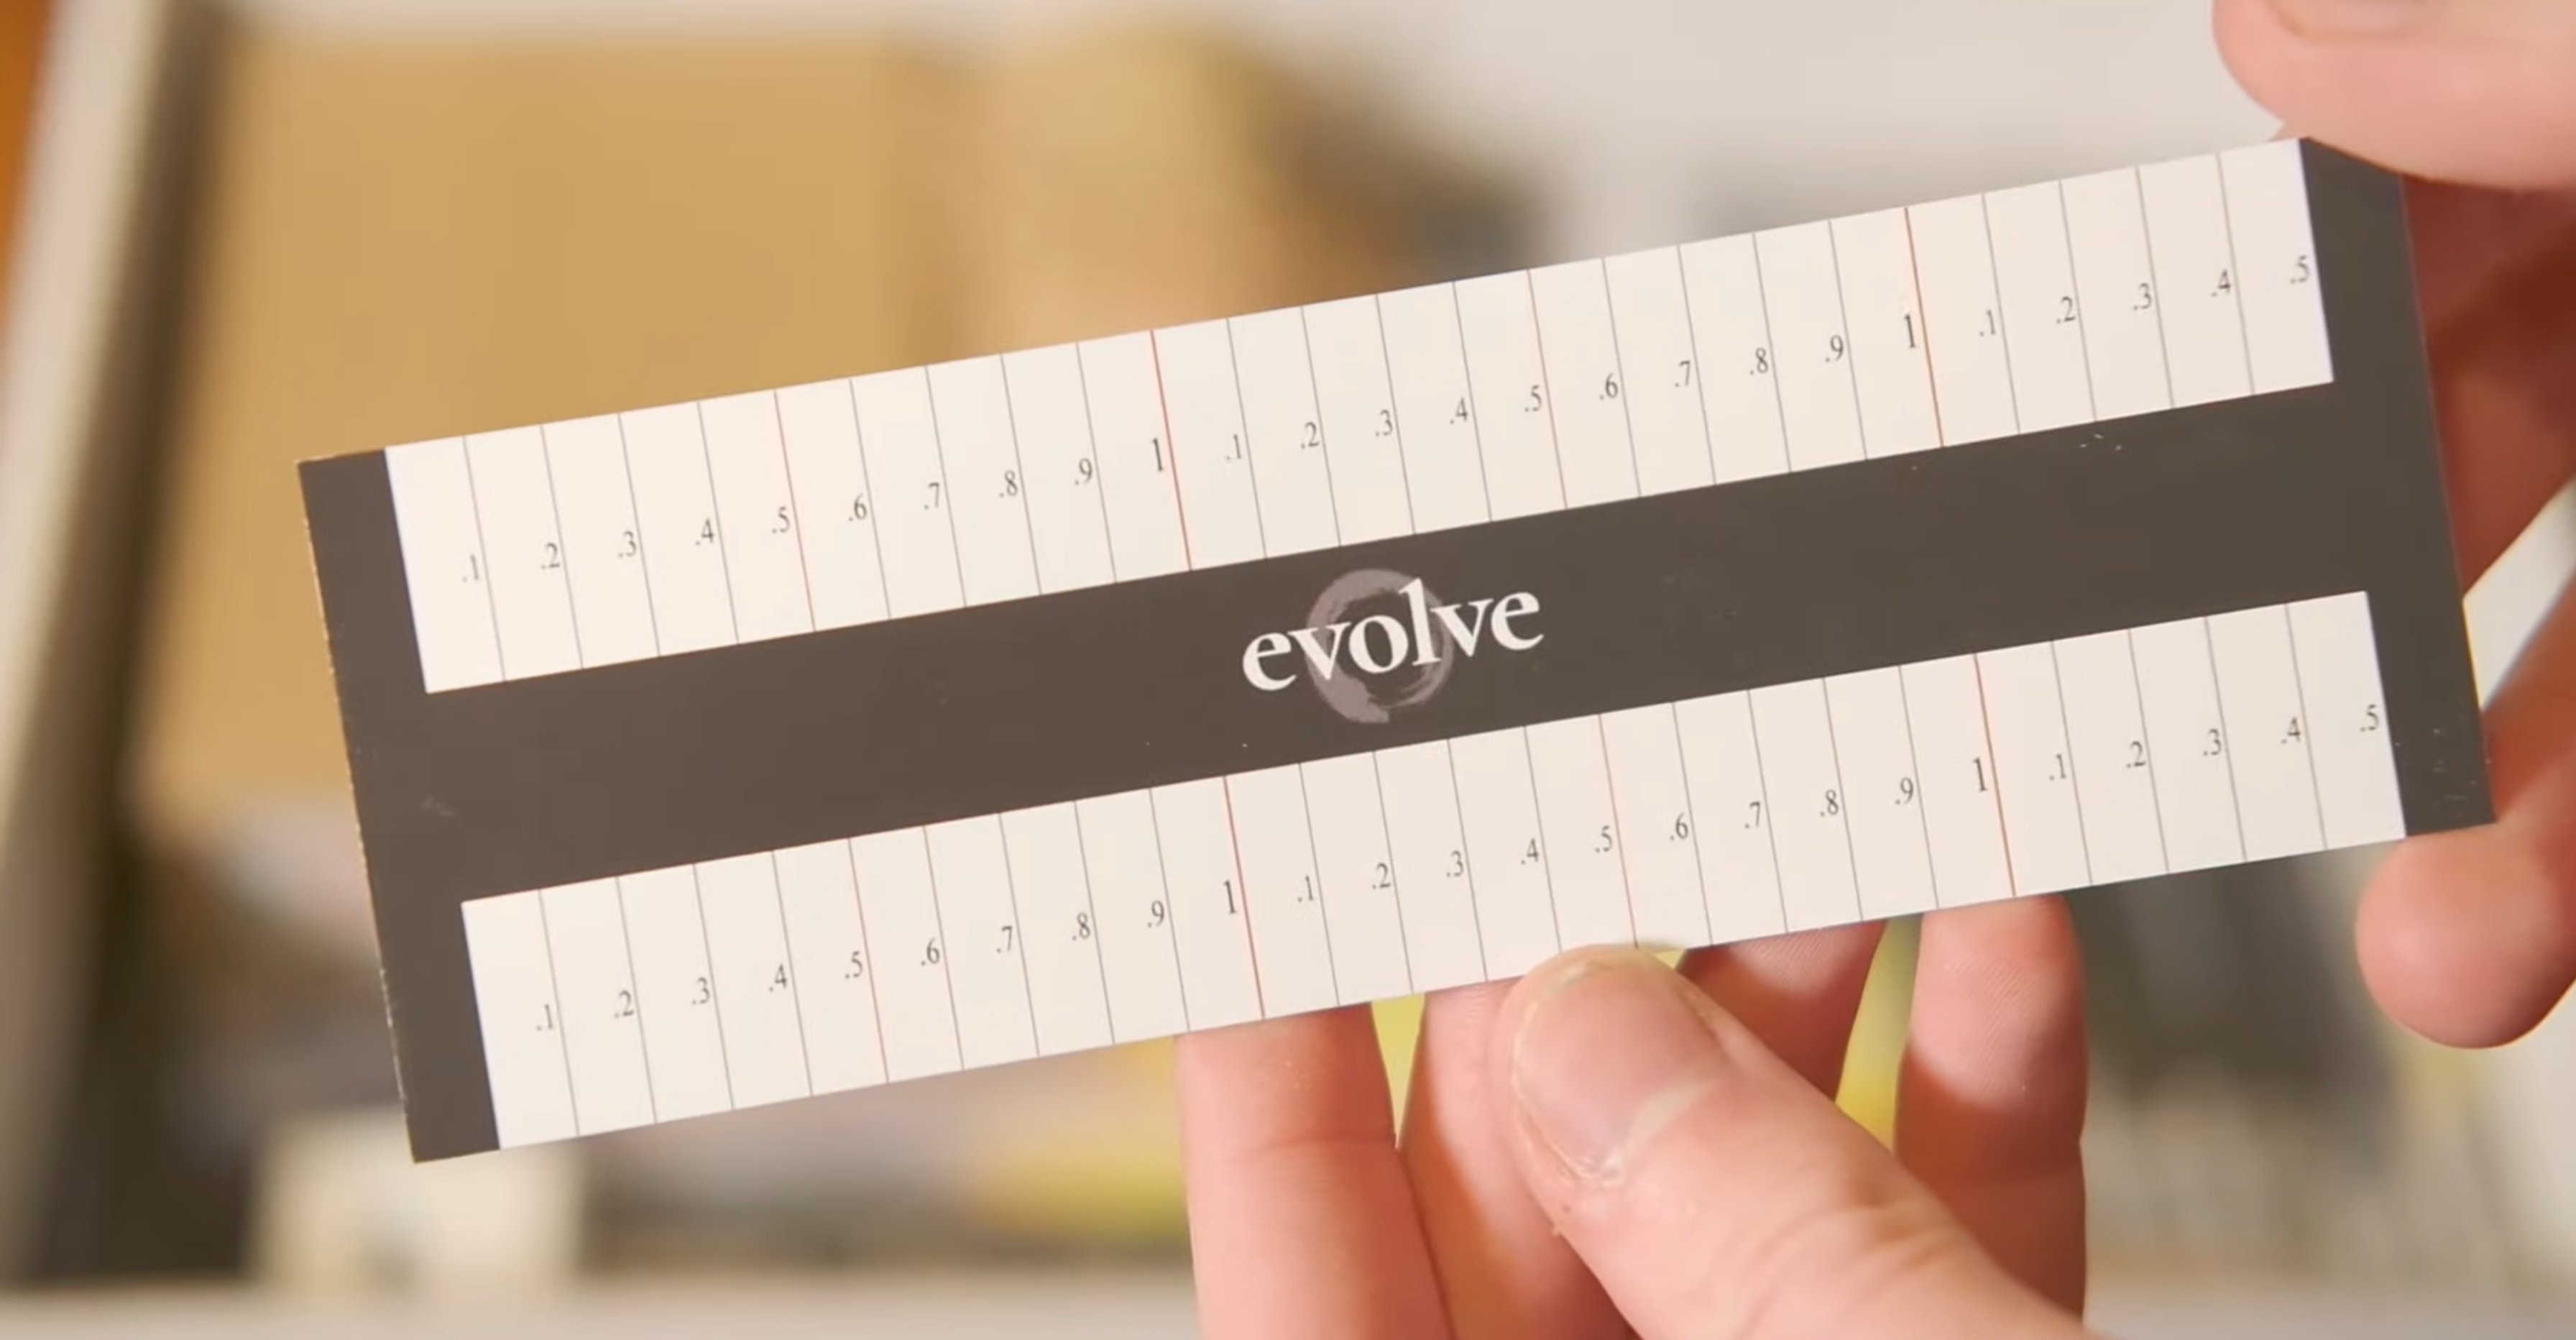 This custom made paper ruler included in the oil painting supplies Evolve sends for Blocks 1 & 2.